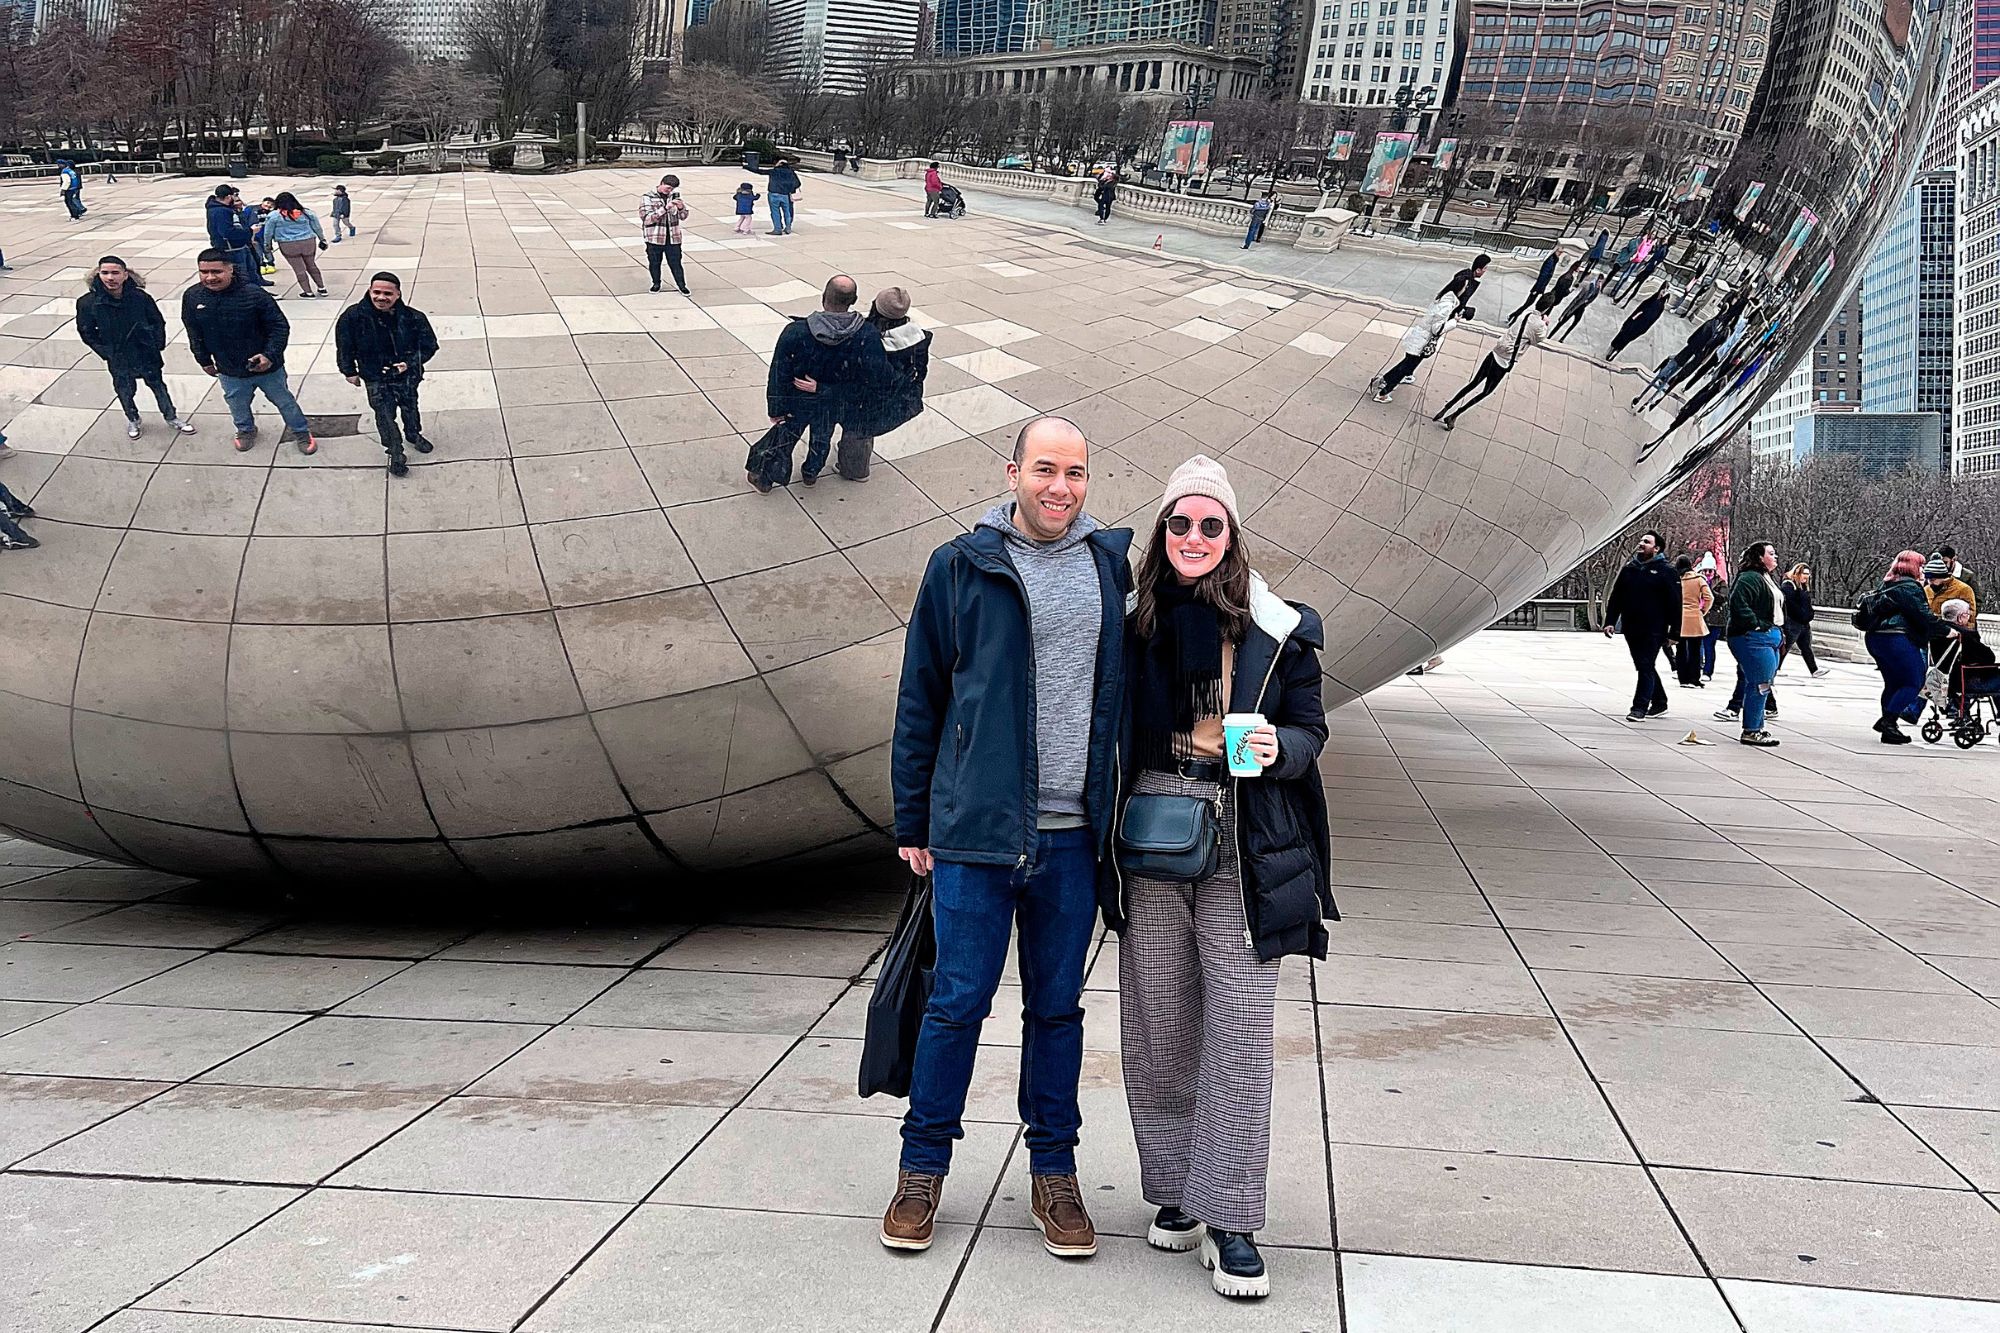 Alyssa and Michael stand in front of The Bean